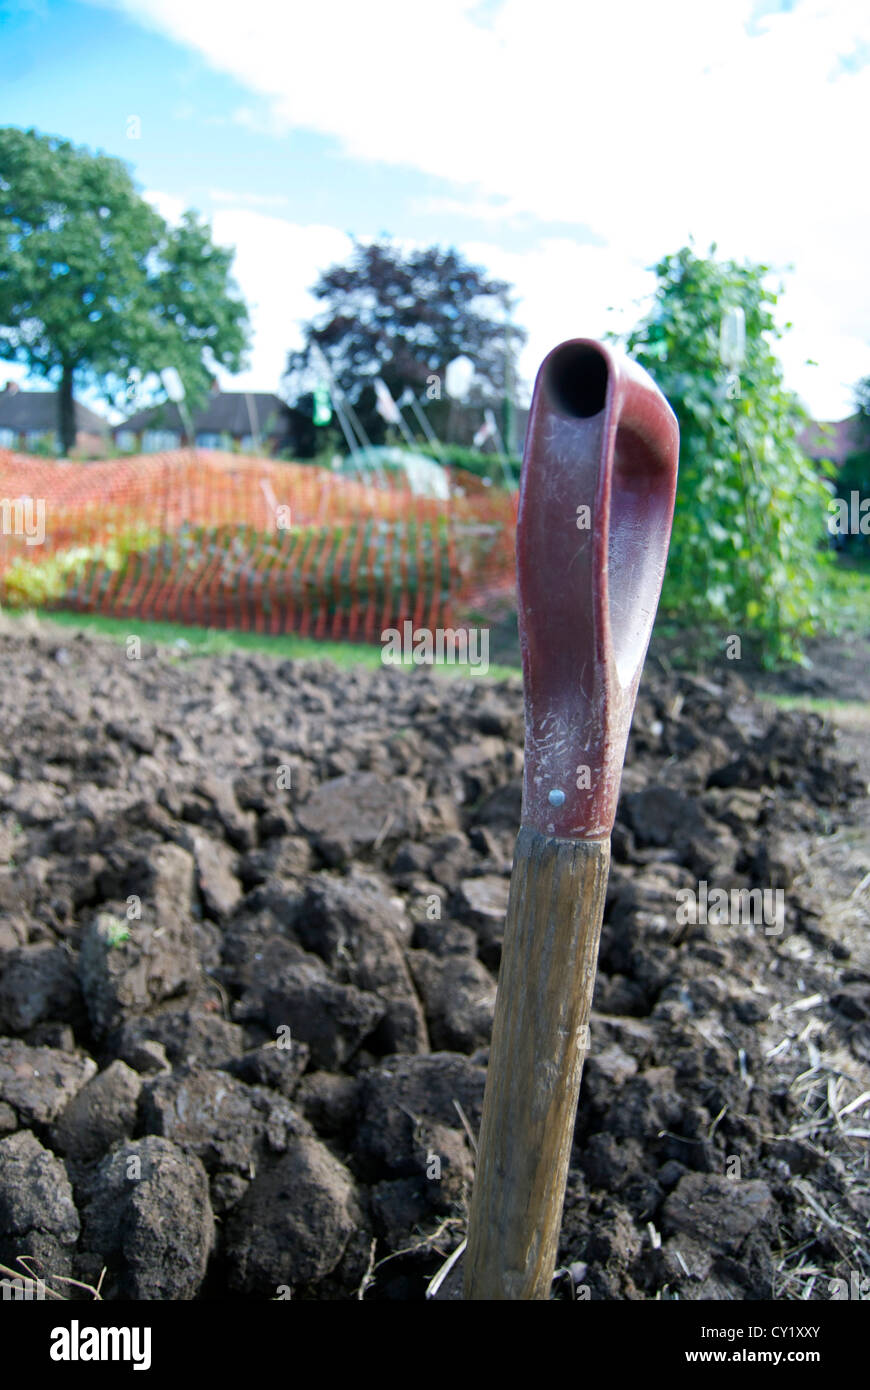 Spade dug into soil in front of allotment Stock Photo